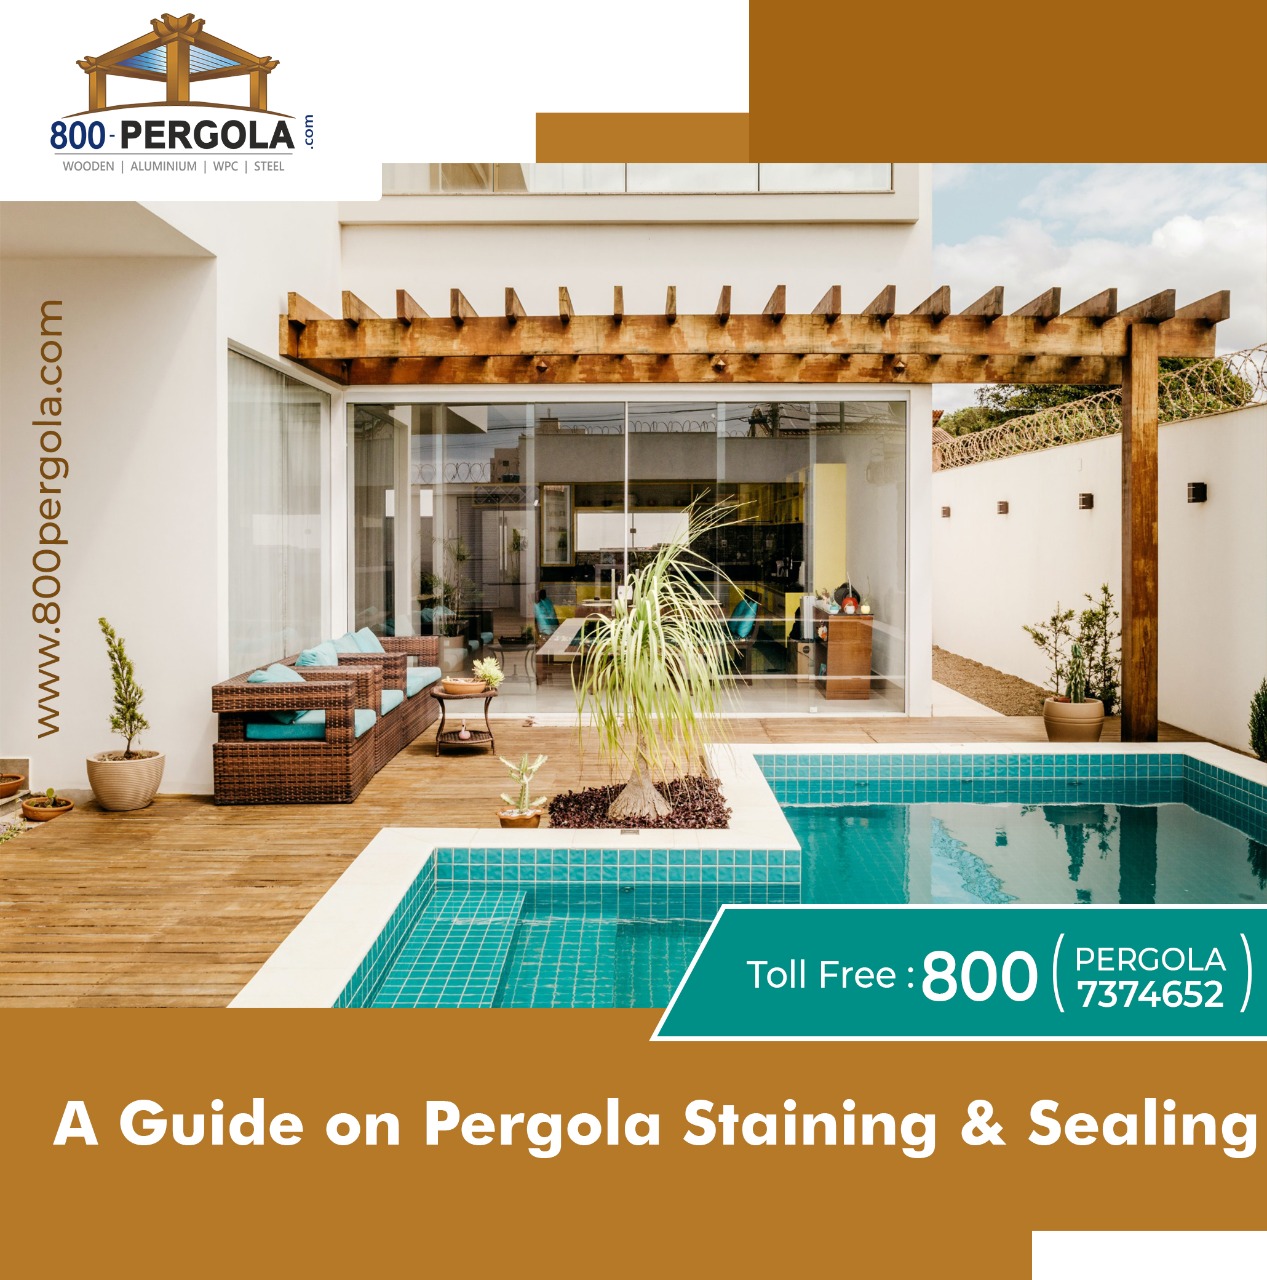 A Guide on Pergola Staining & Sealing